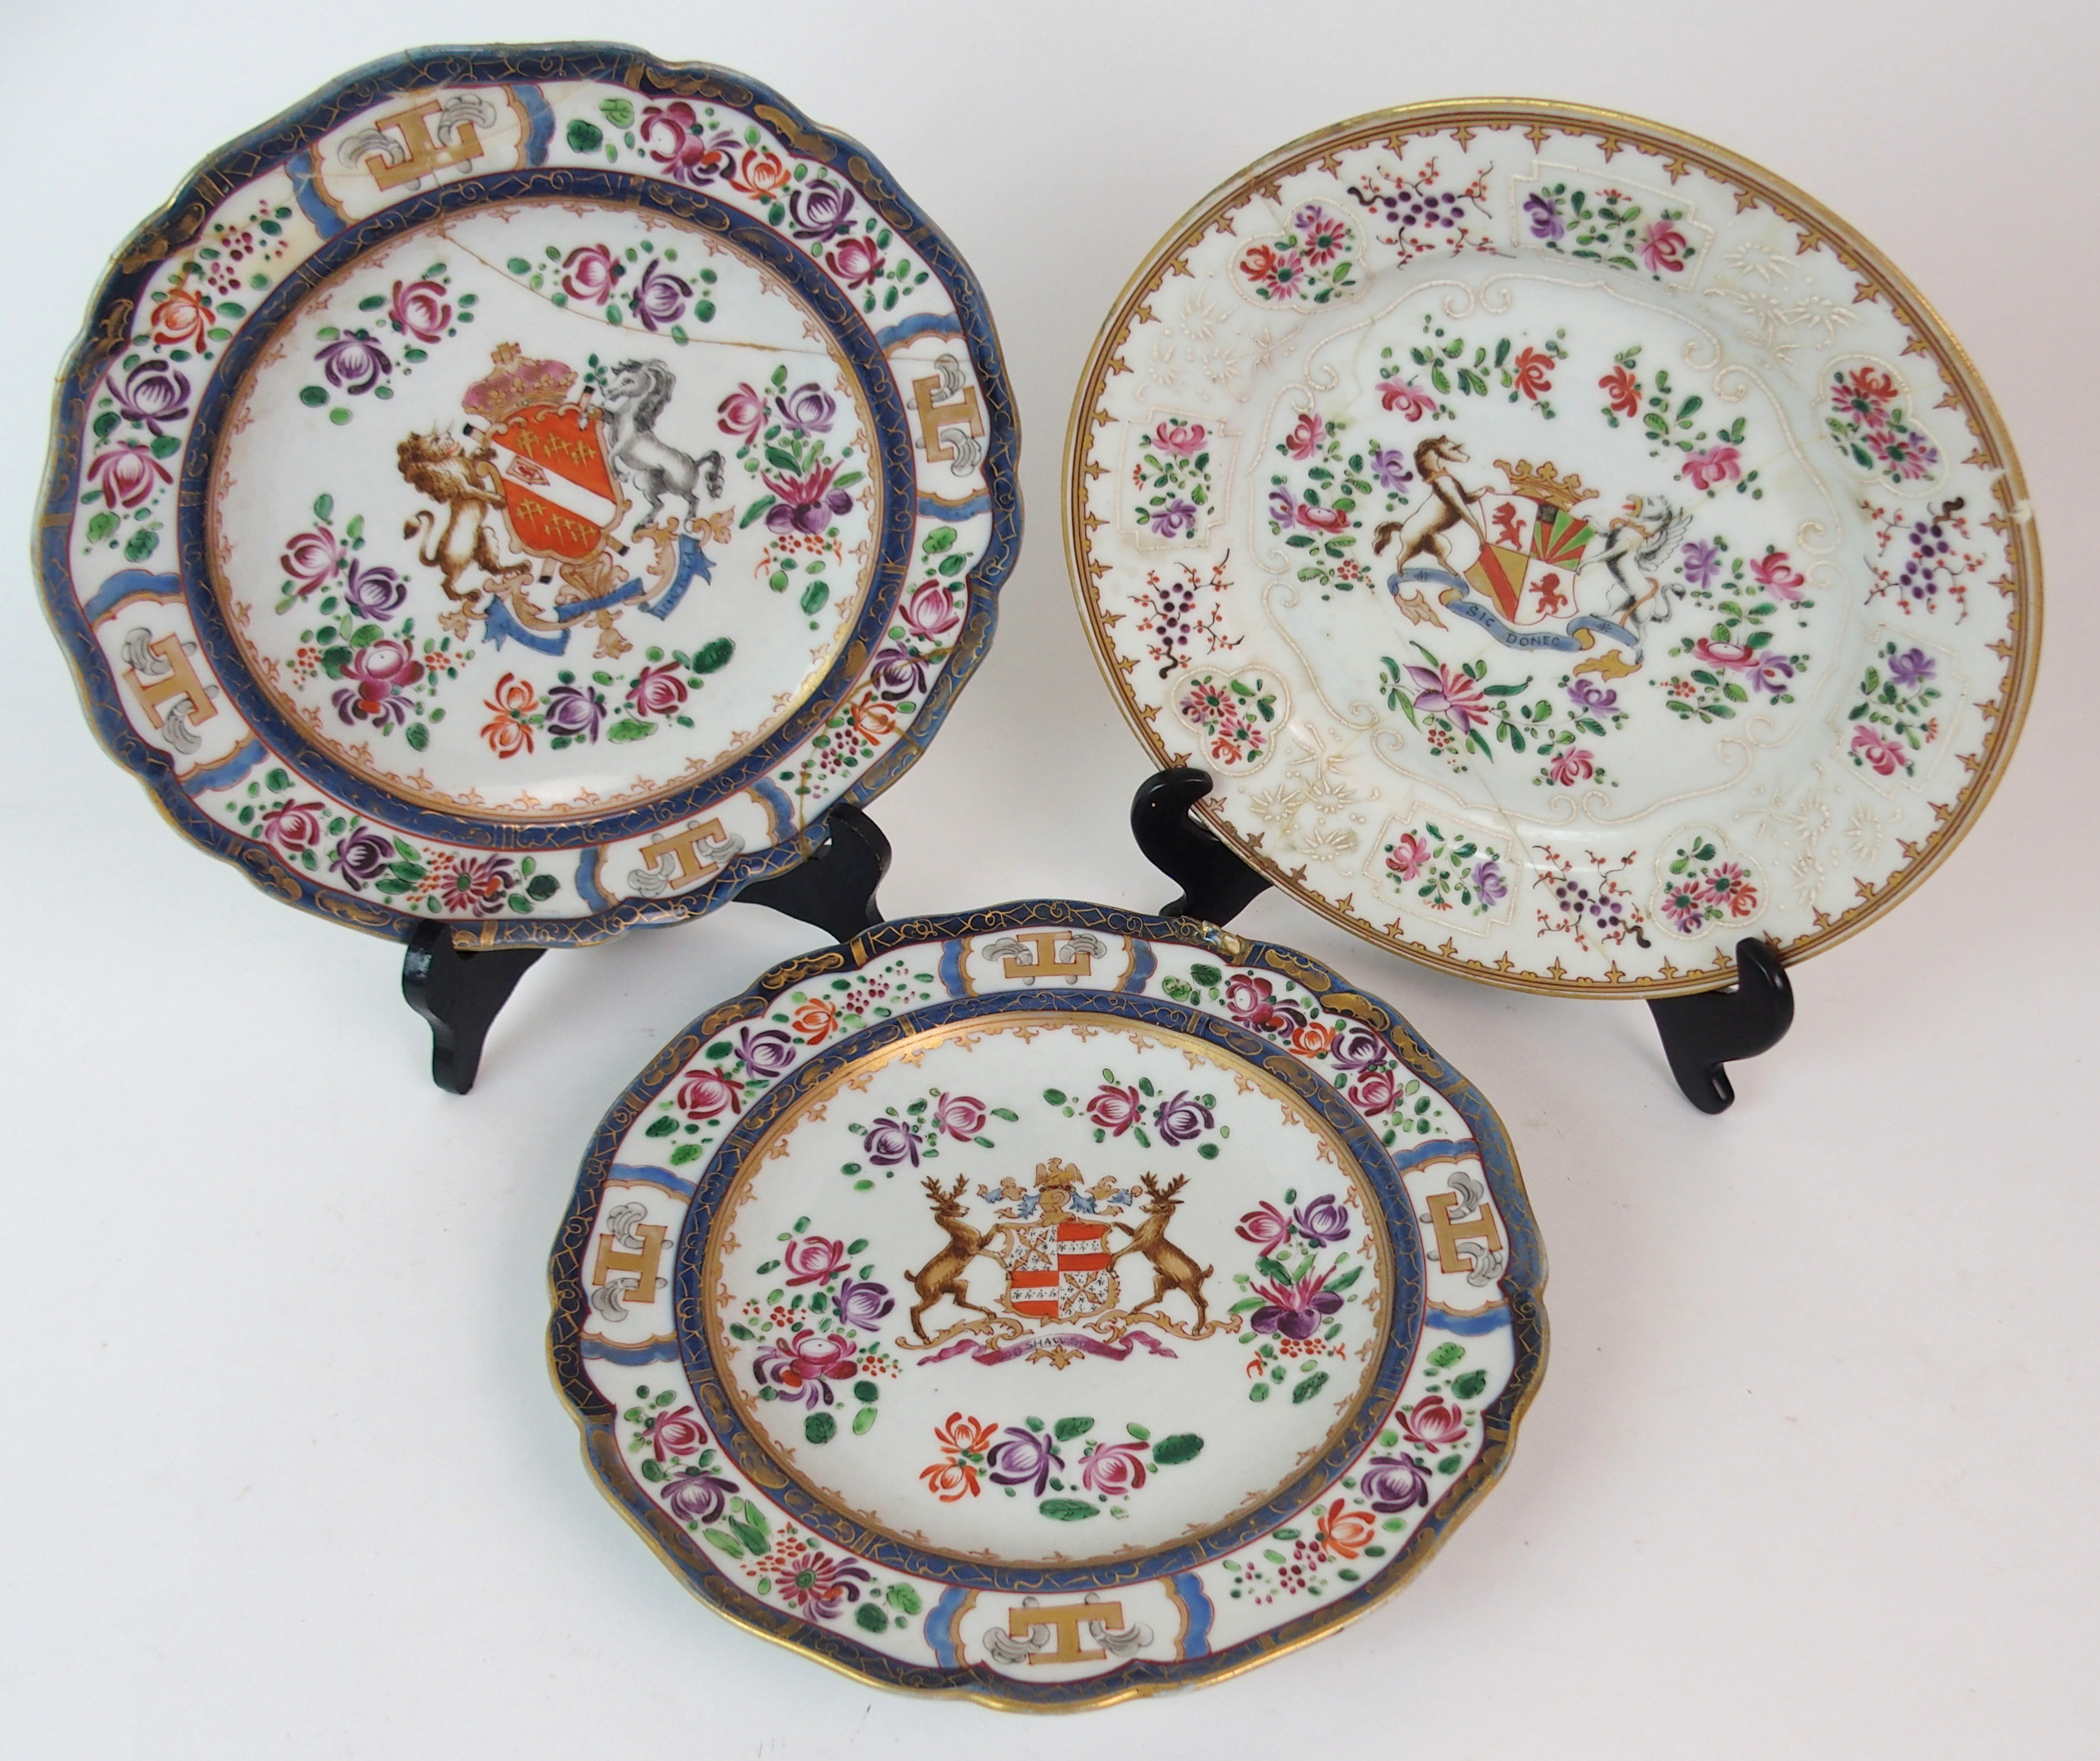 THREE CHINESE EXPORT ARMORIAL PLATES each showing a coat of arms for Howard, Crawford and Egerton, a - Image 2 of 10